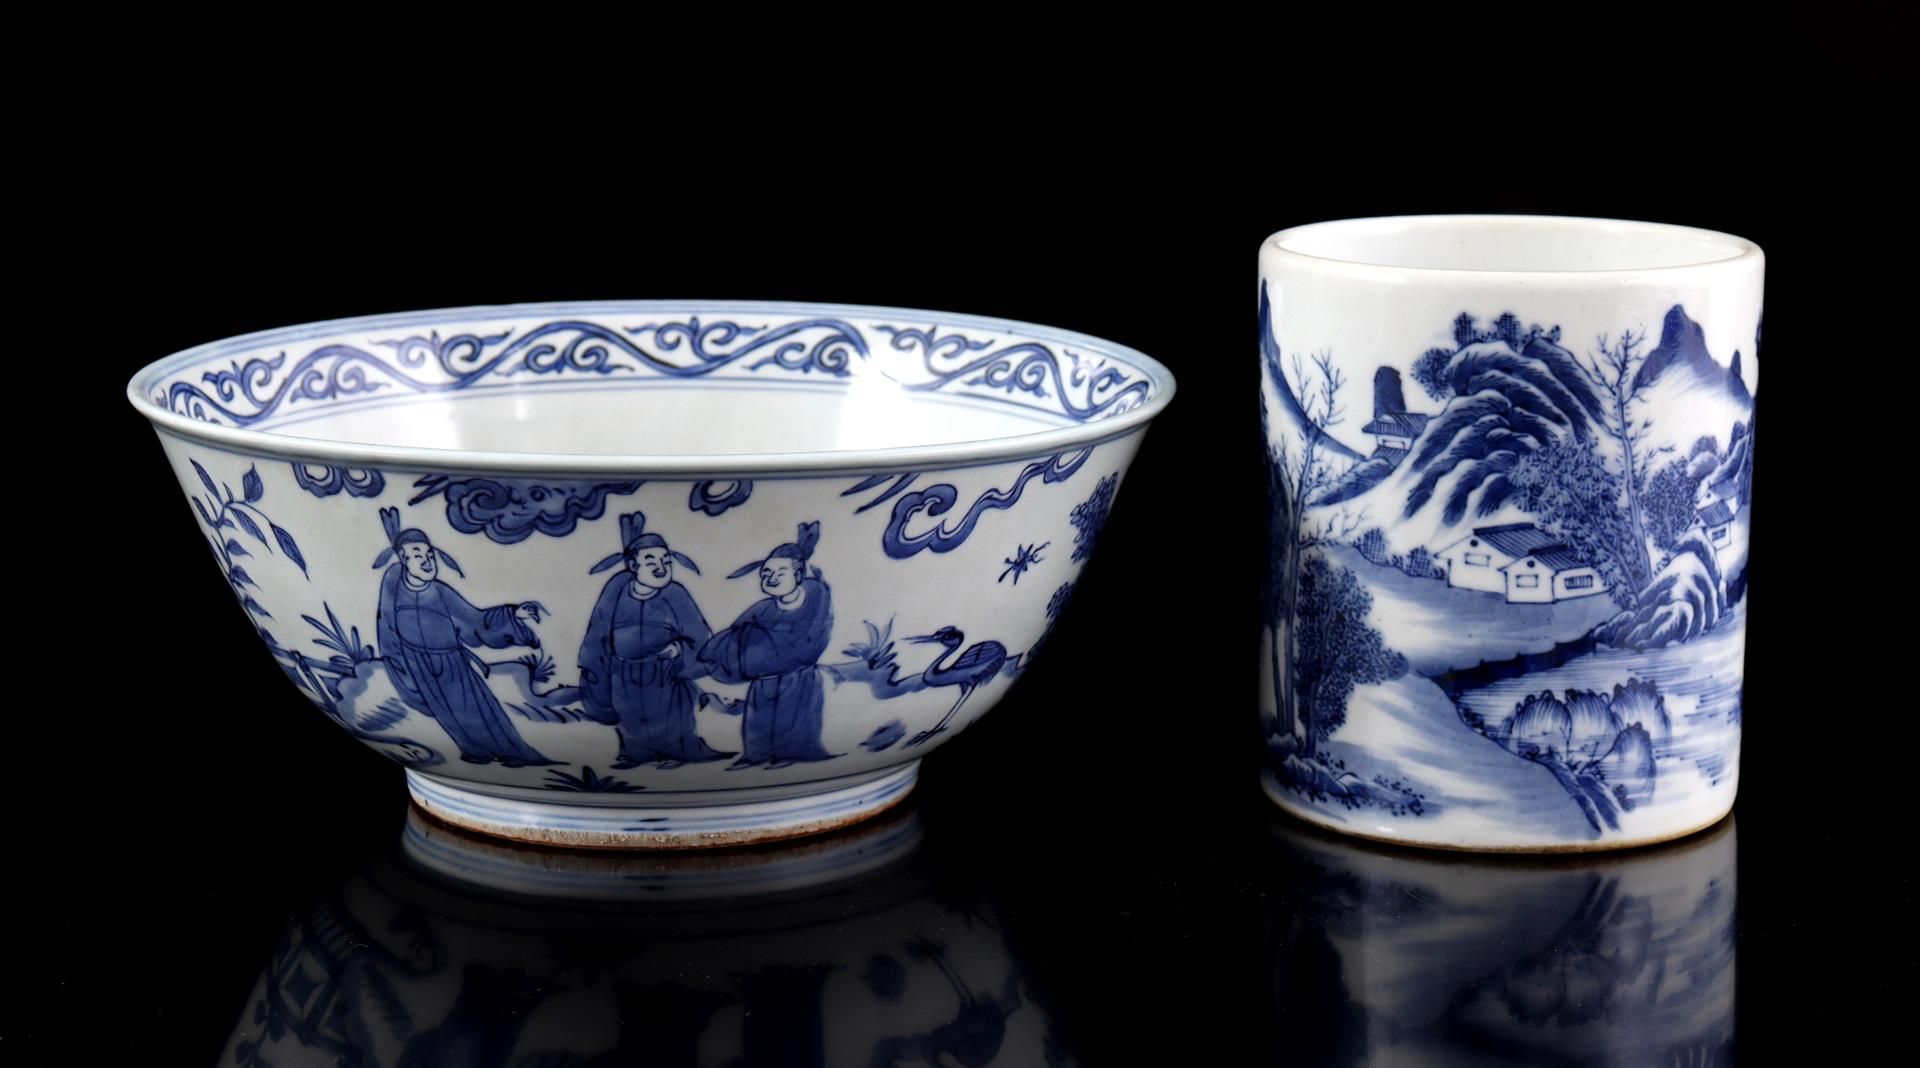 Porcelain bowl with blue and white decoration of persons